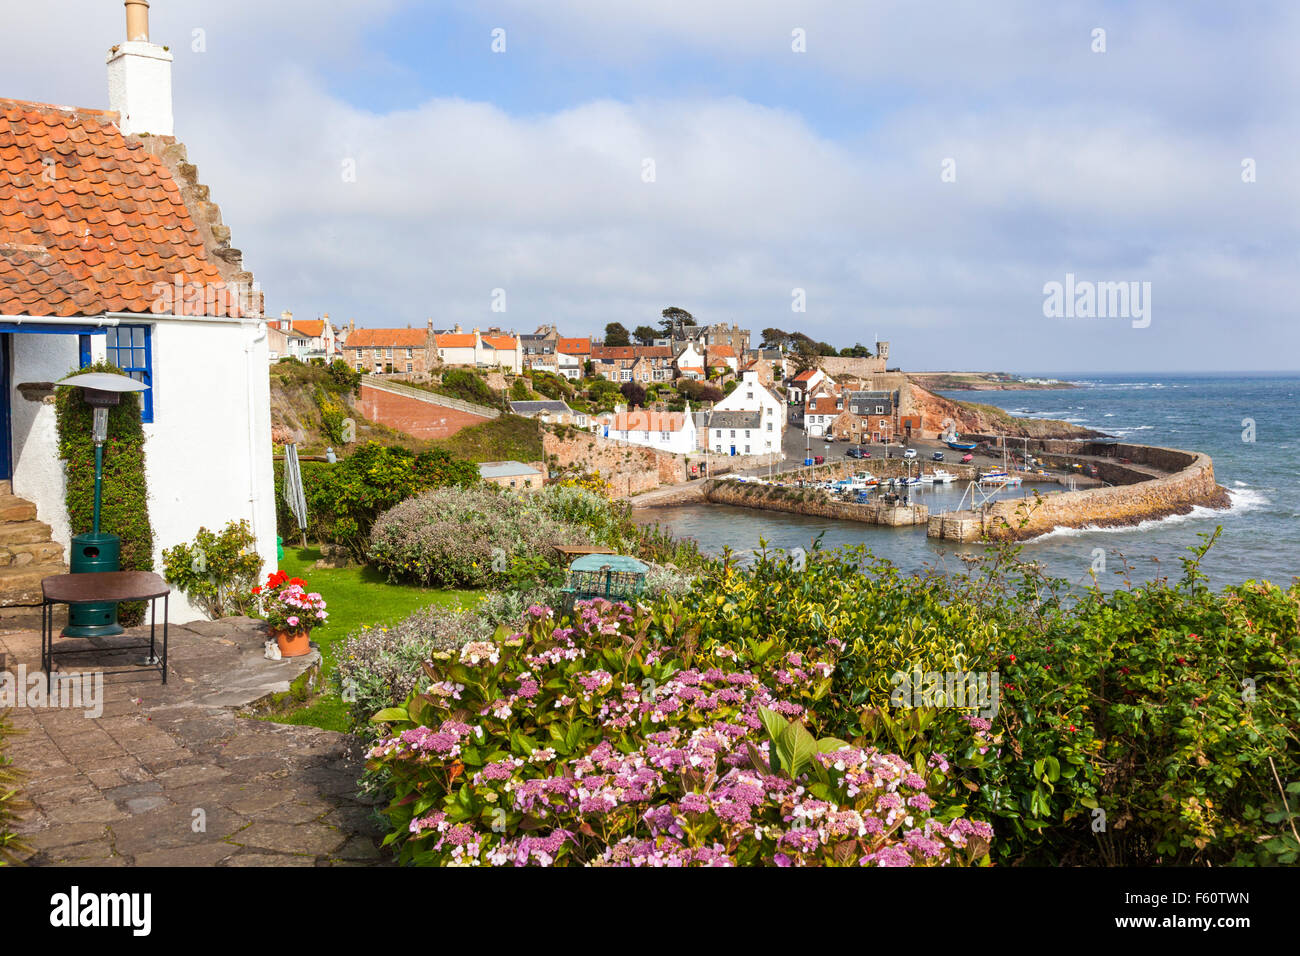 High tide at the harbour in the small fishing village of Crail in the East Neuk of Fife, Scotland UK Stock Photo